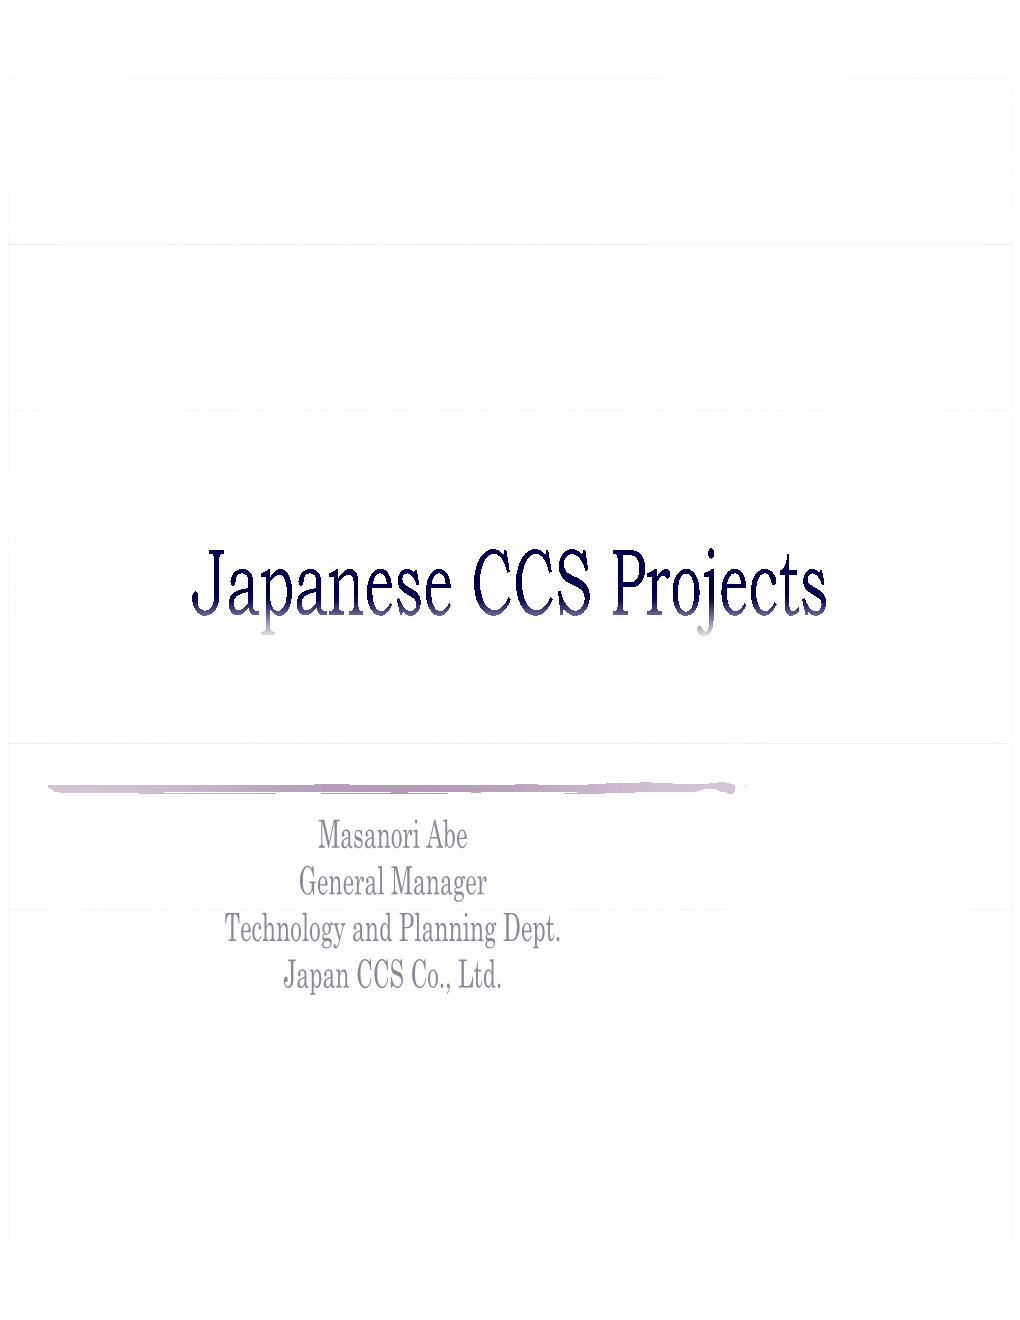 Japanese CCS Projects